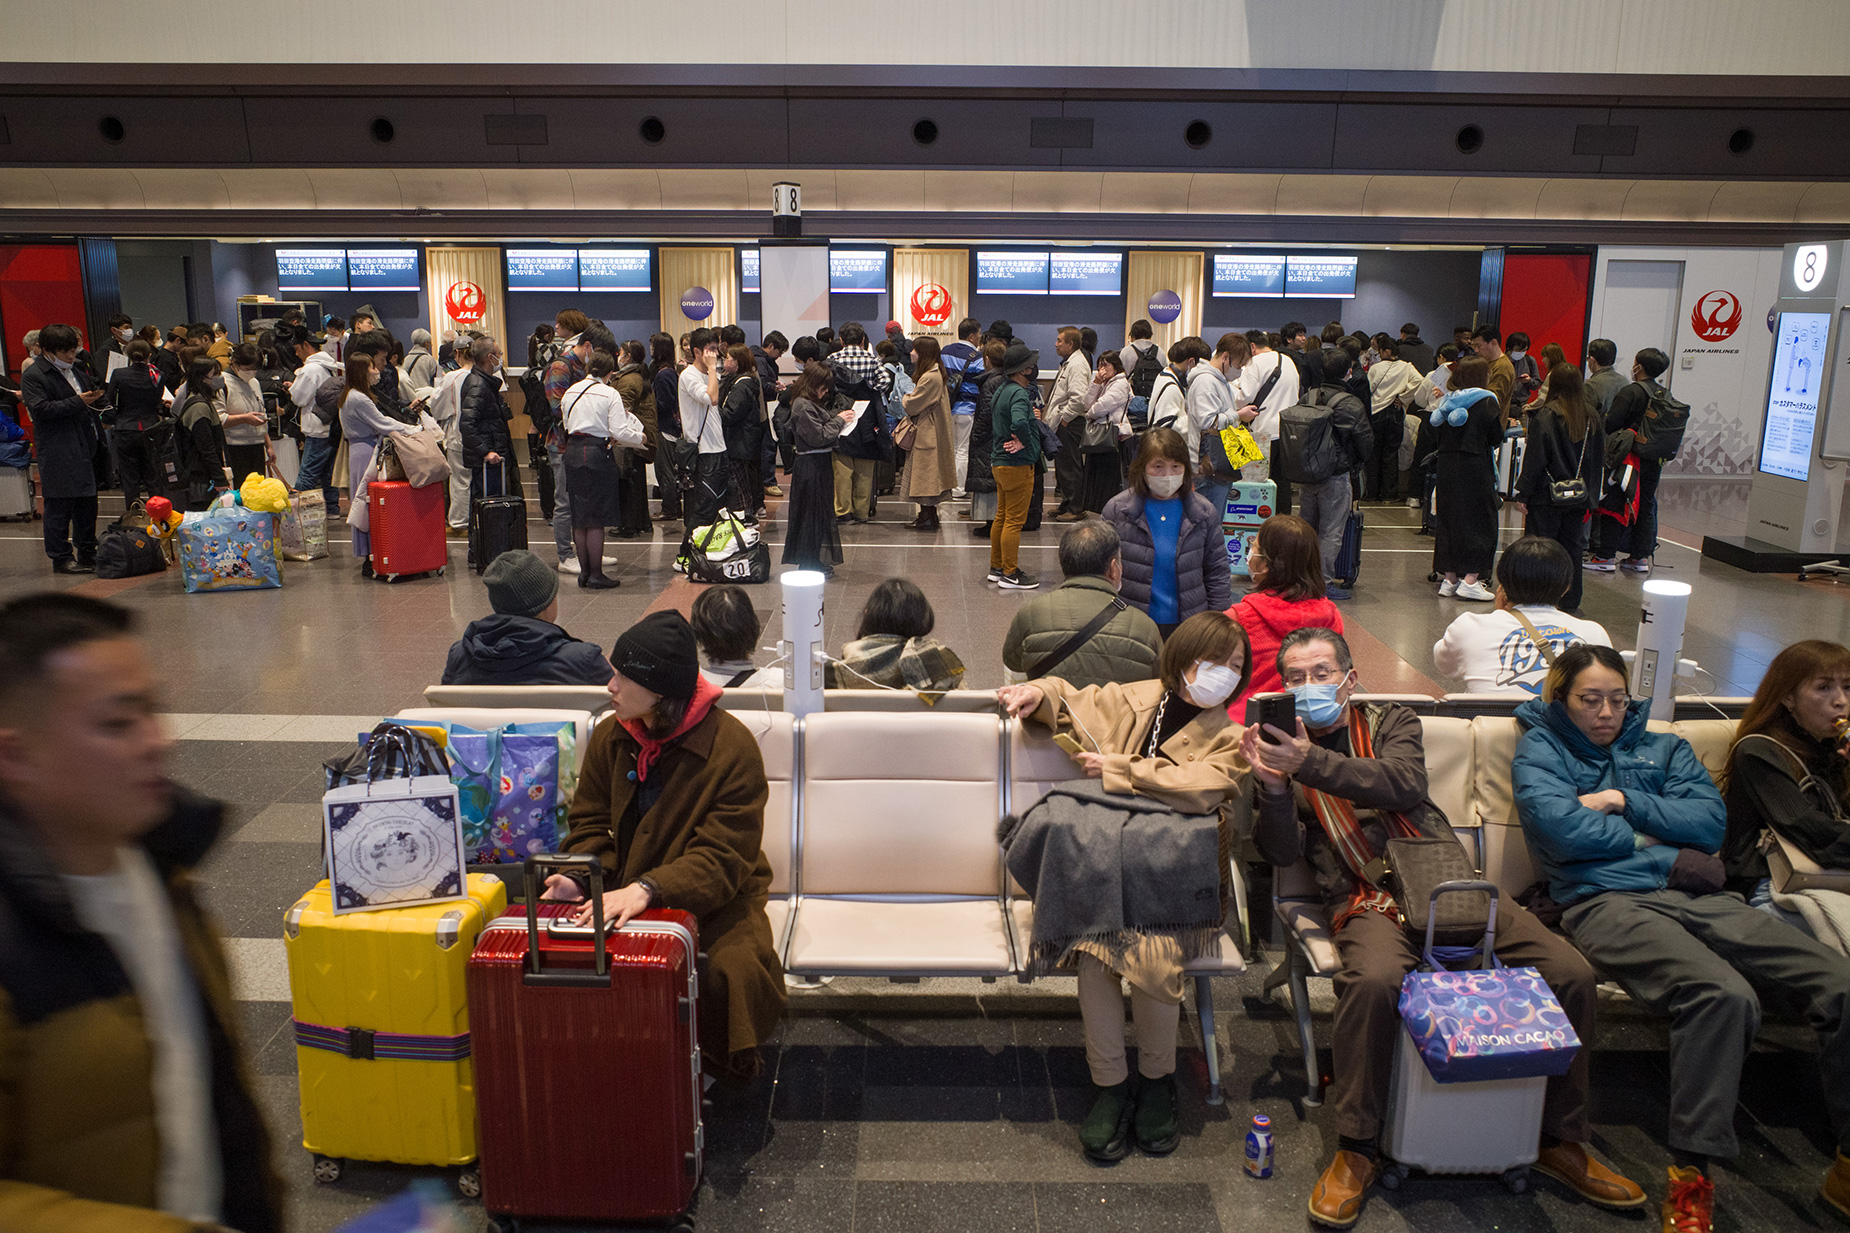 Travelers line up at a Japan Airlines service counter at Haneda International Airport in Tokyo, following flight cancellations due to an aircraft collision on Tuesday, January 2. 